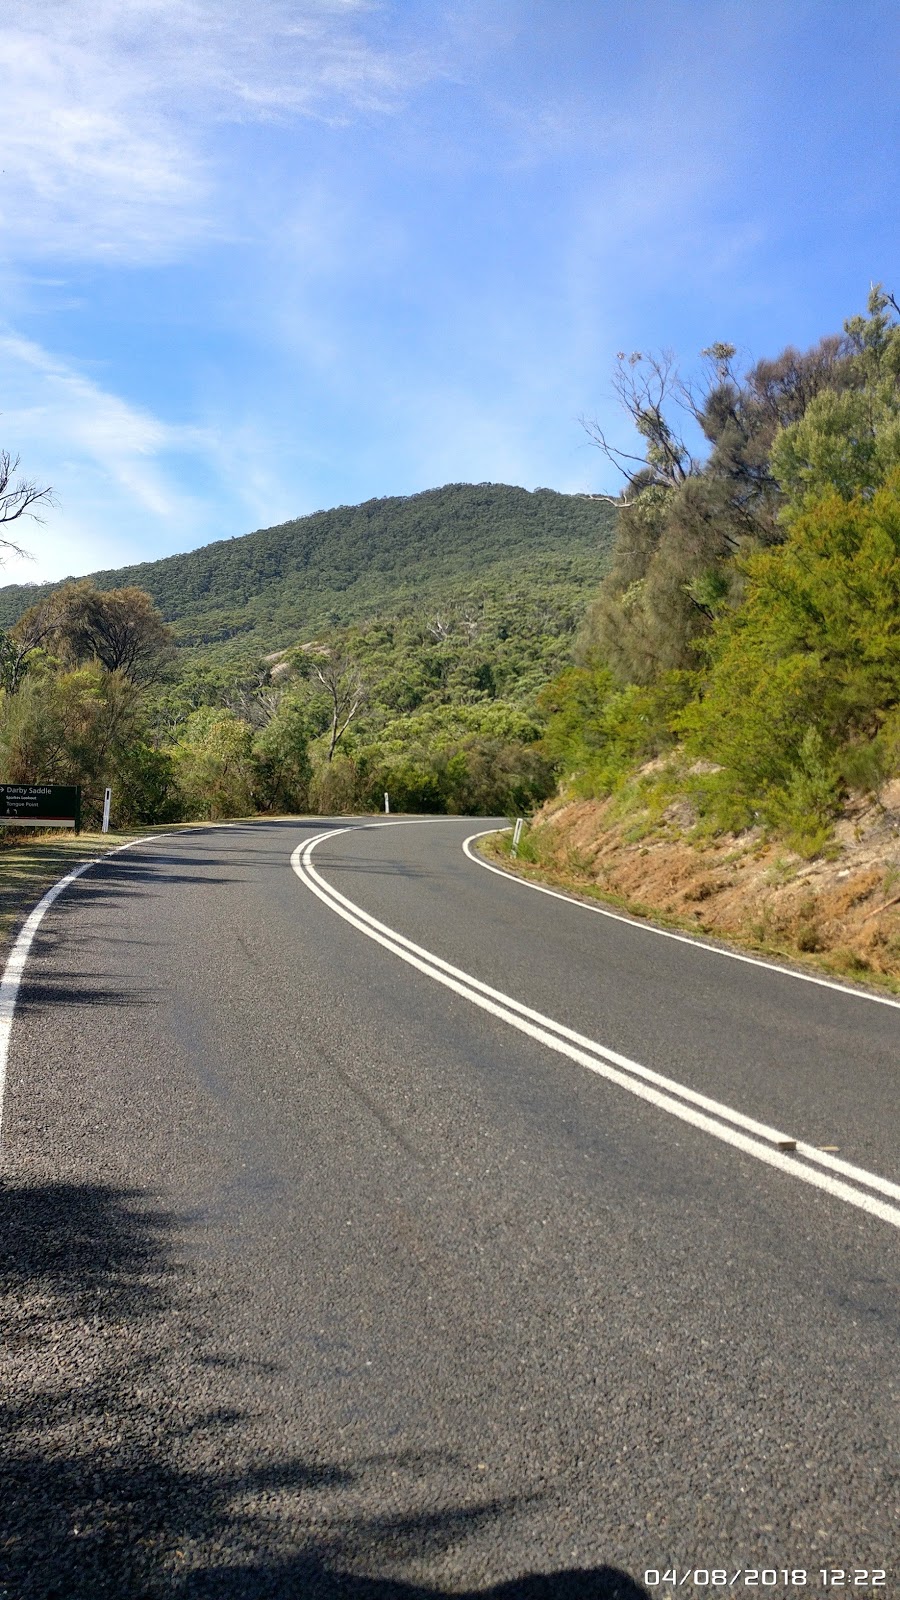 Darby Saddle Carpark | parking | Wilsons Promontory Rd, Wilsons Promontory VIC 3960, Australia | 131963 OR +61 131963